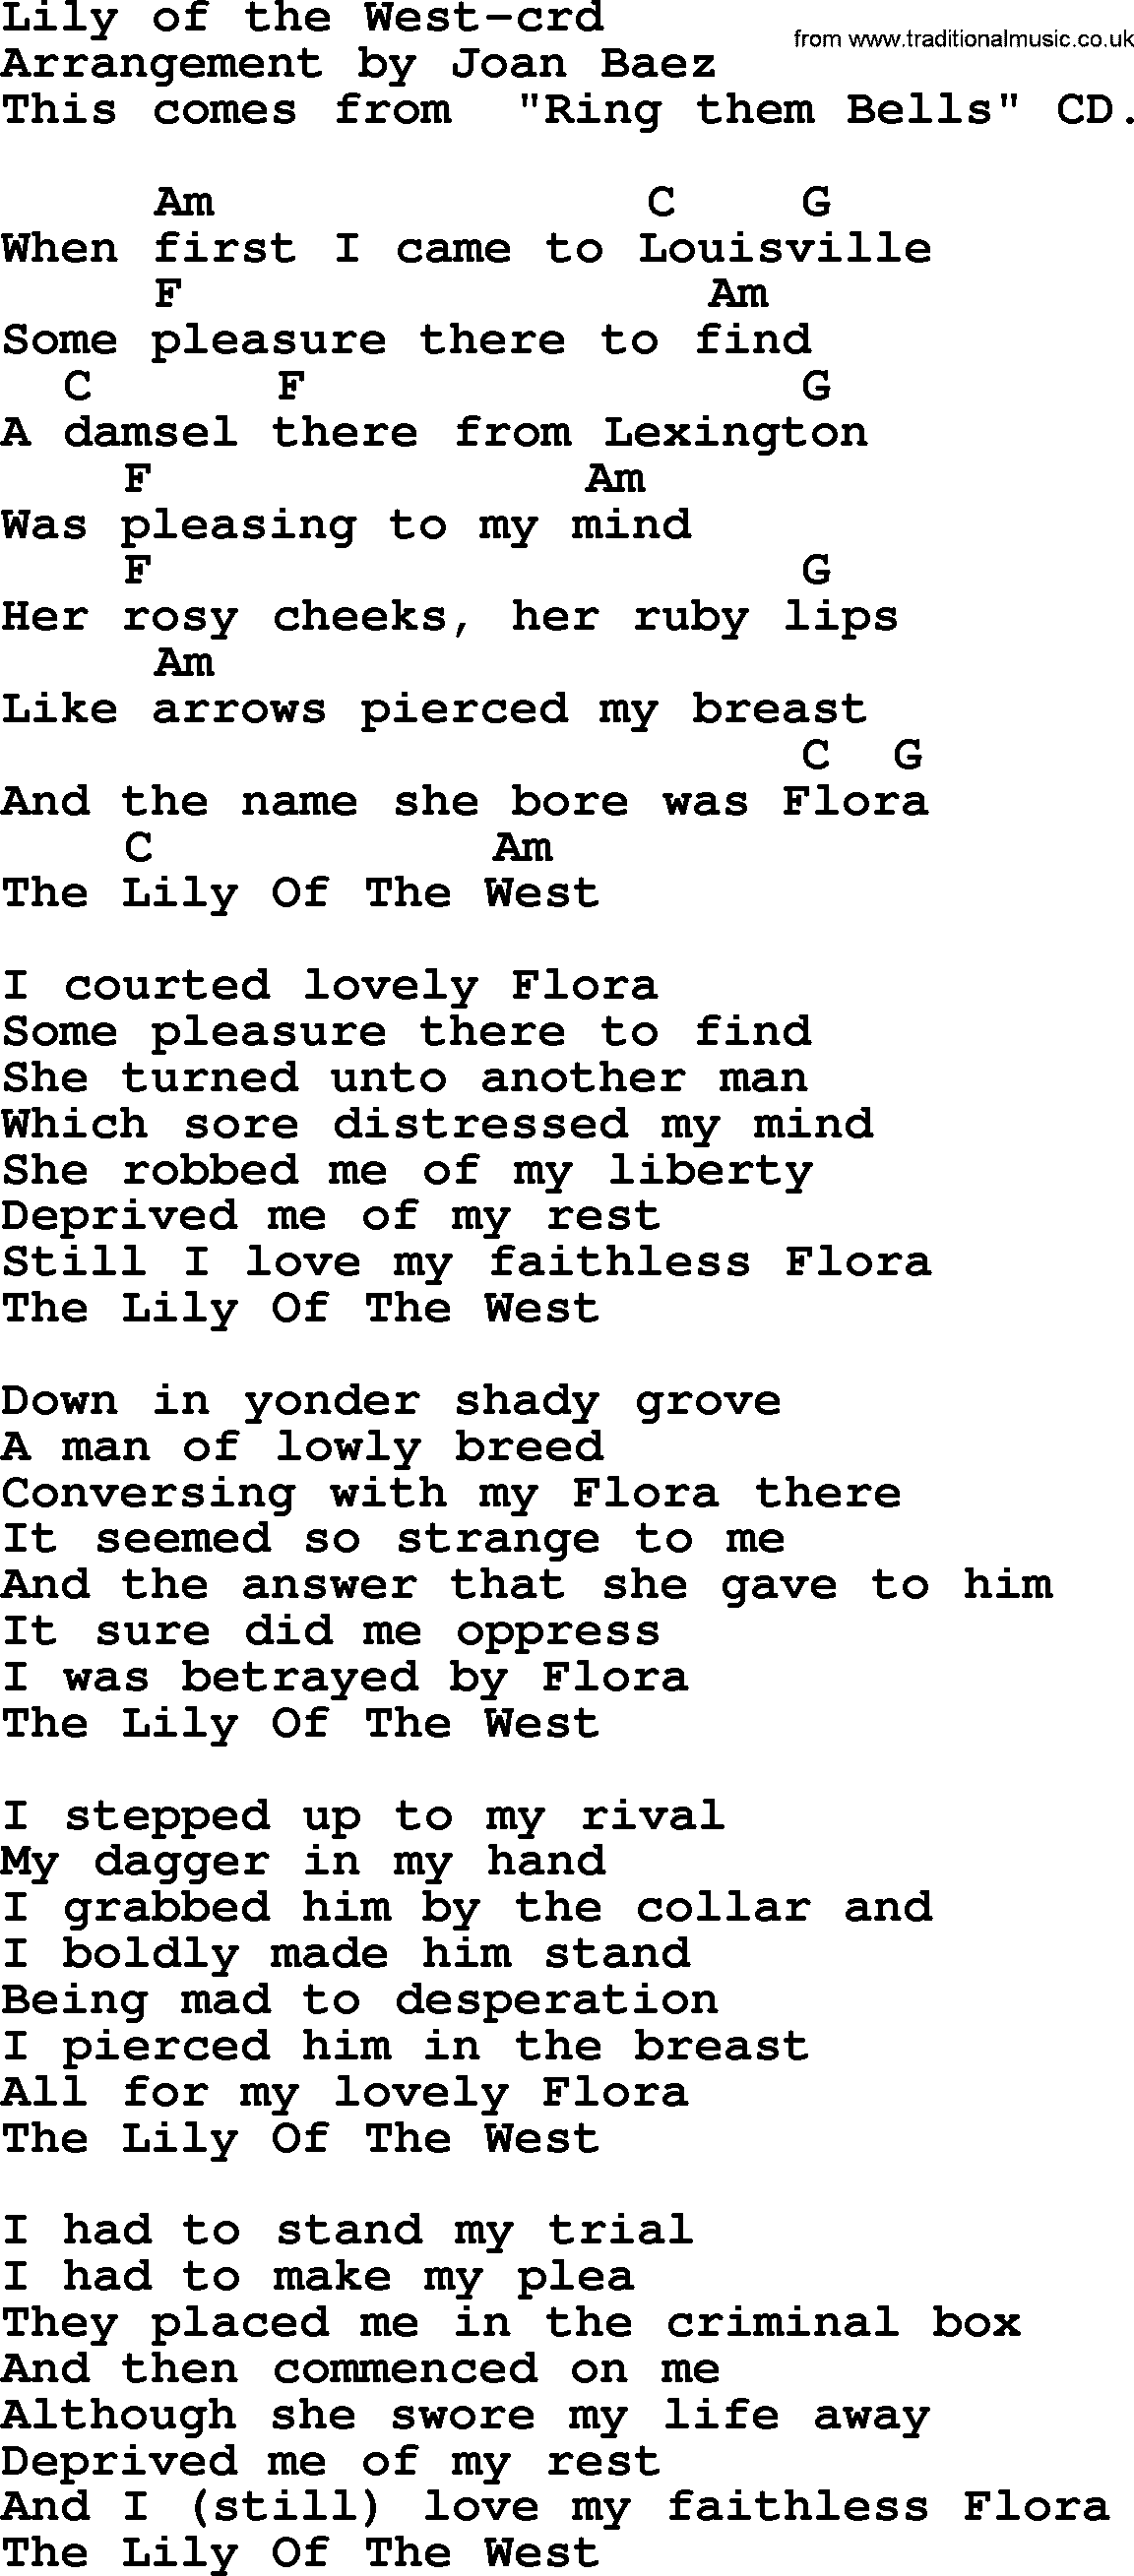 Joan Baez song Lily Of The West lyrics and chords